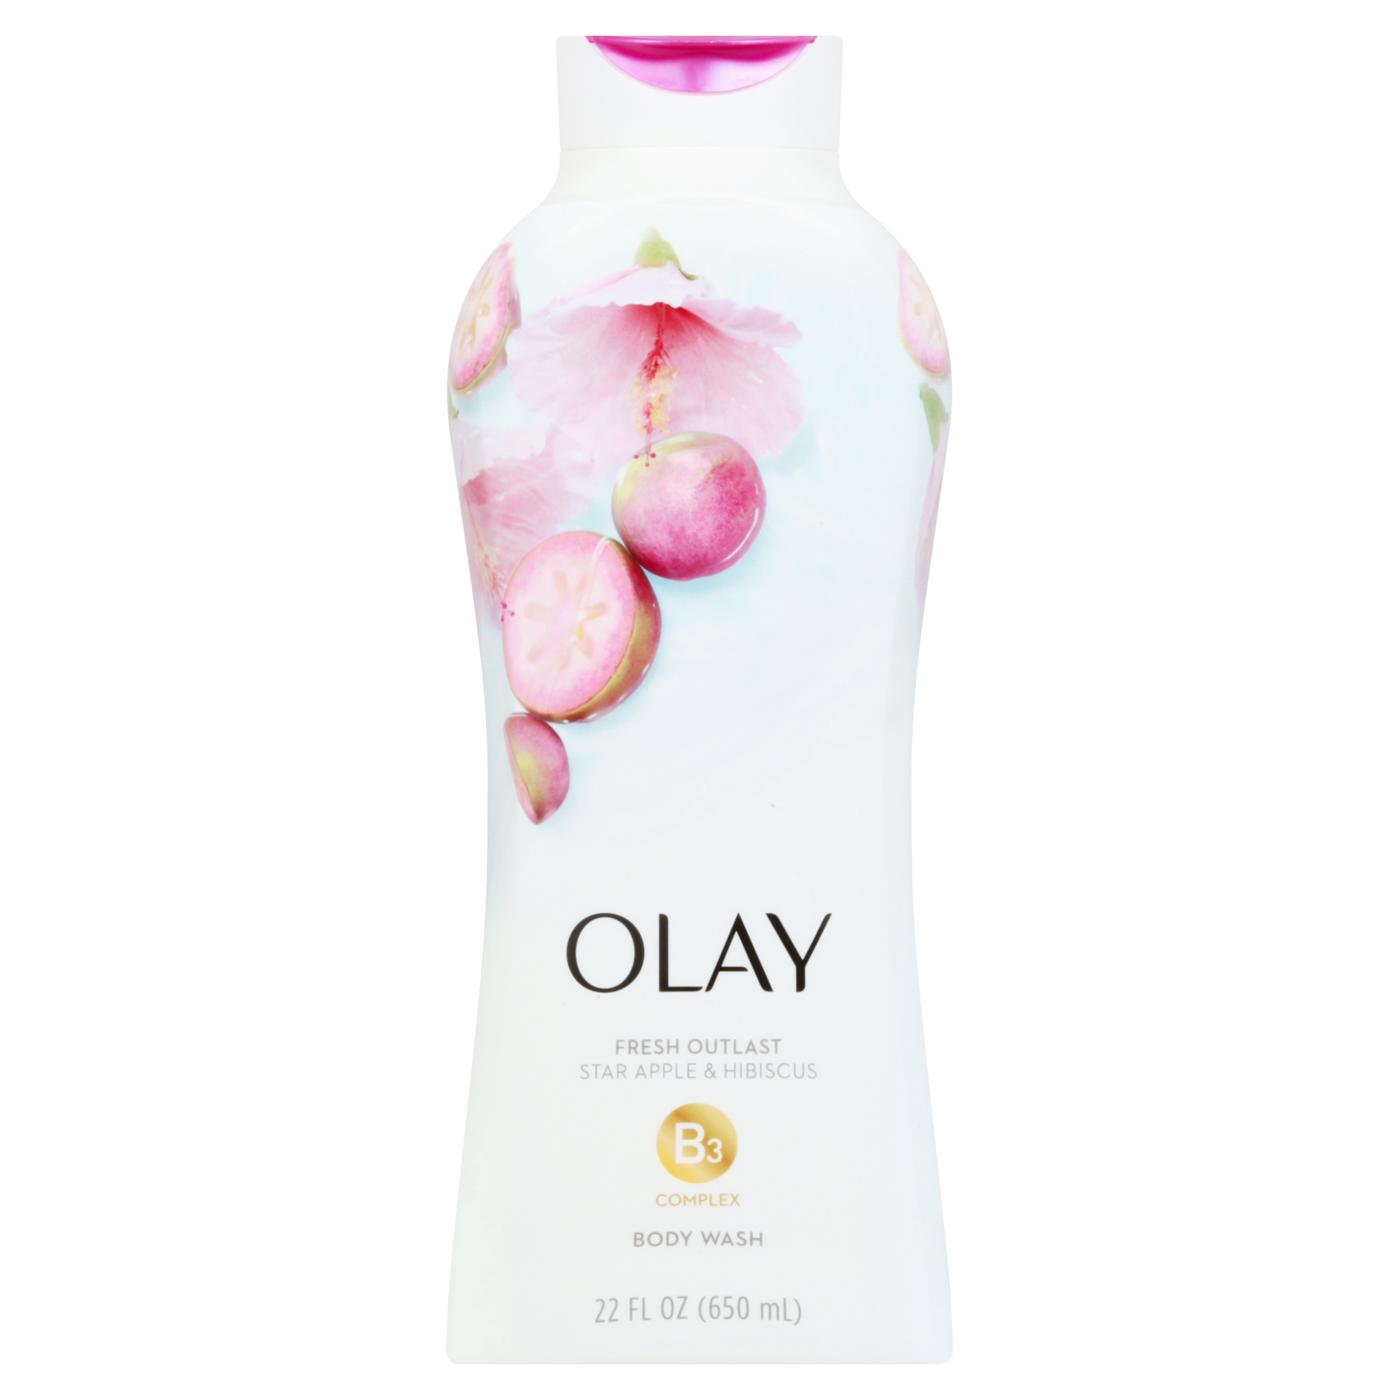 Olay Fresh Outlast Star Apple & Hibiscus Body Wash; image 1 of 2